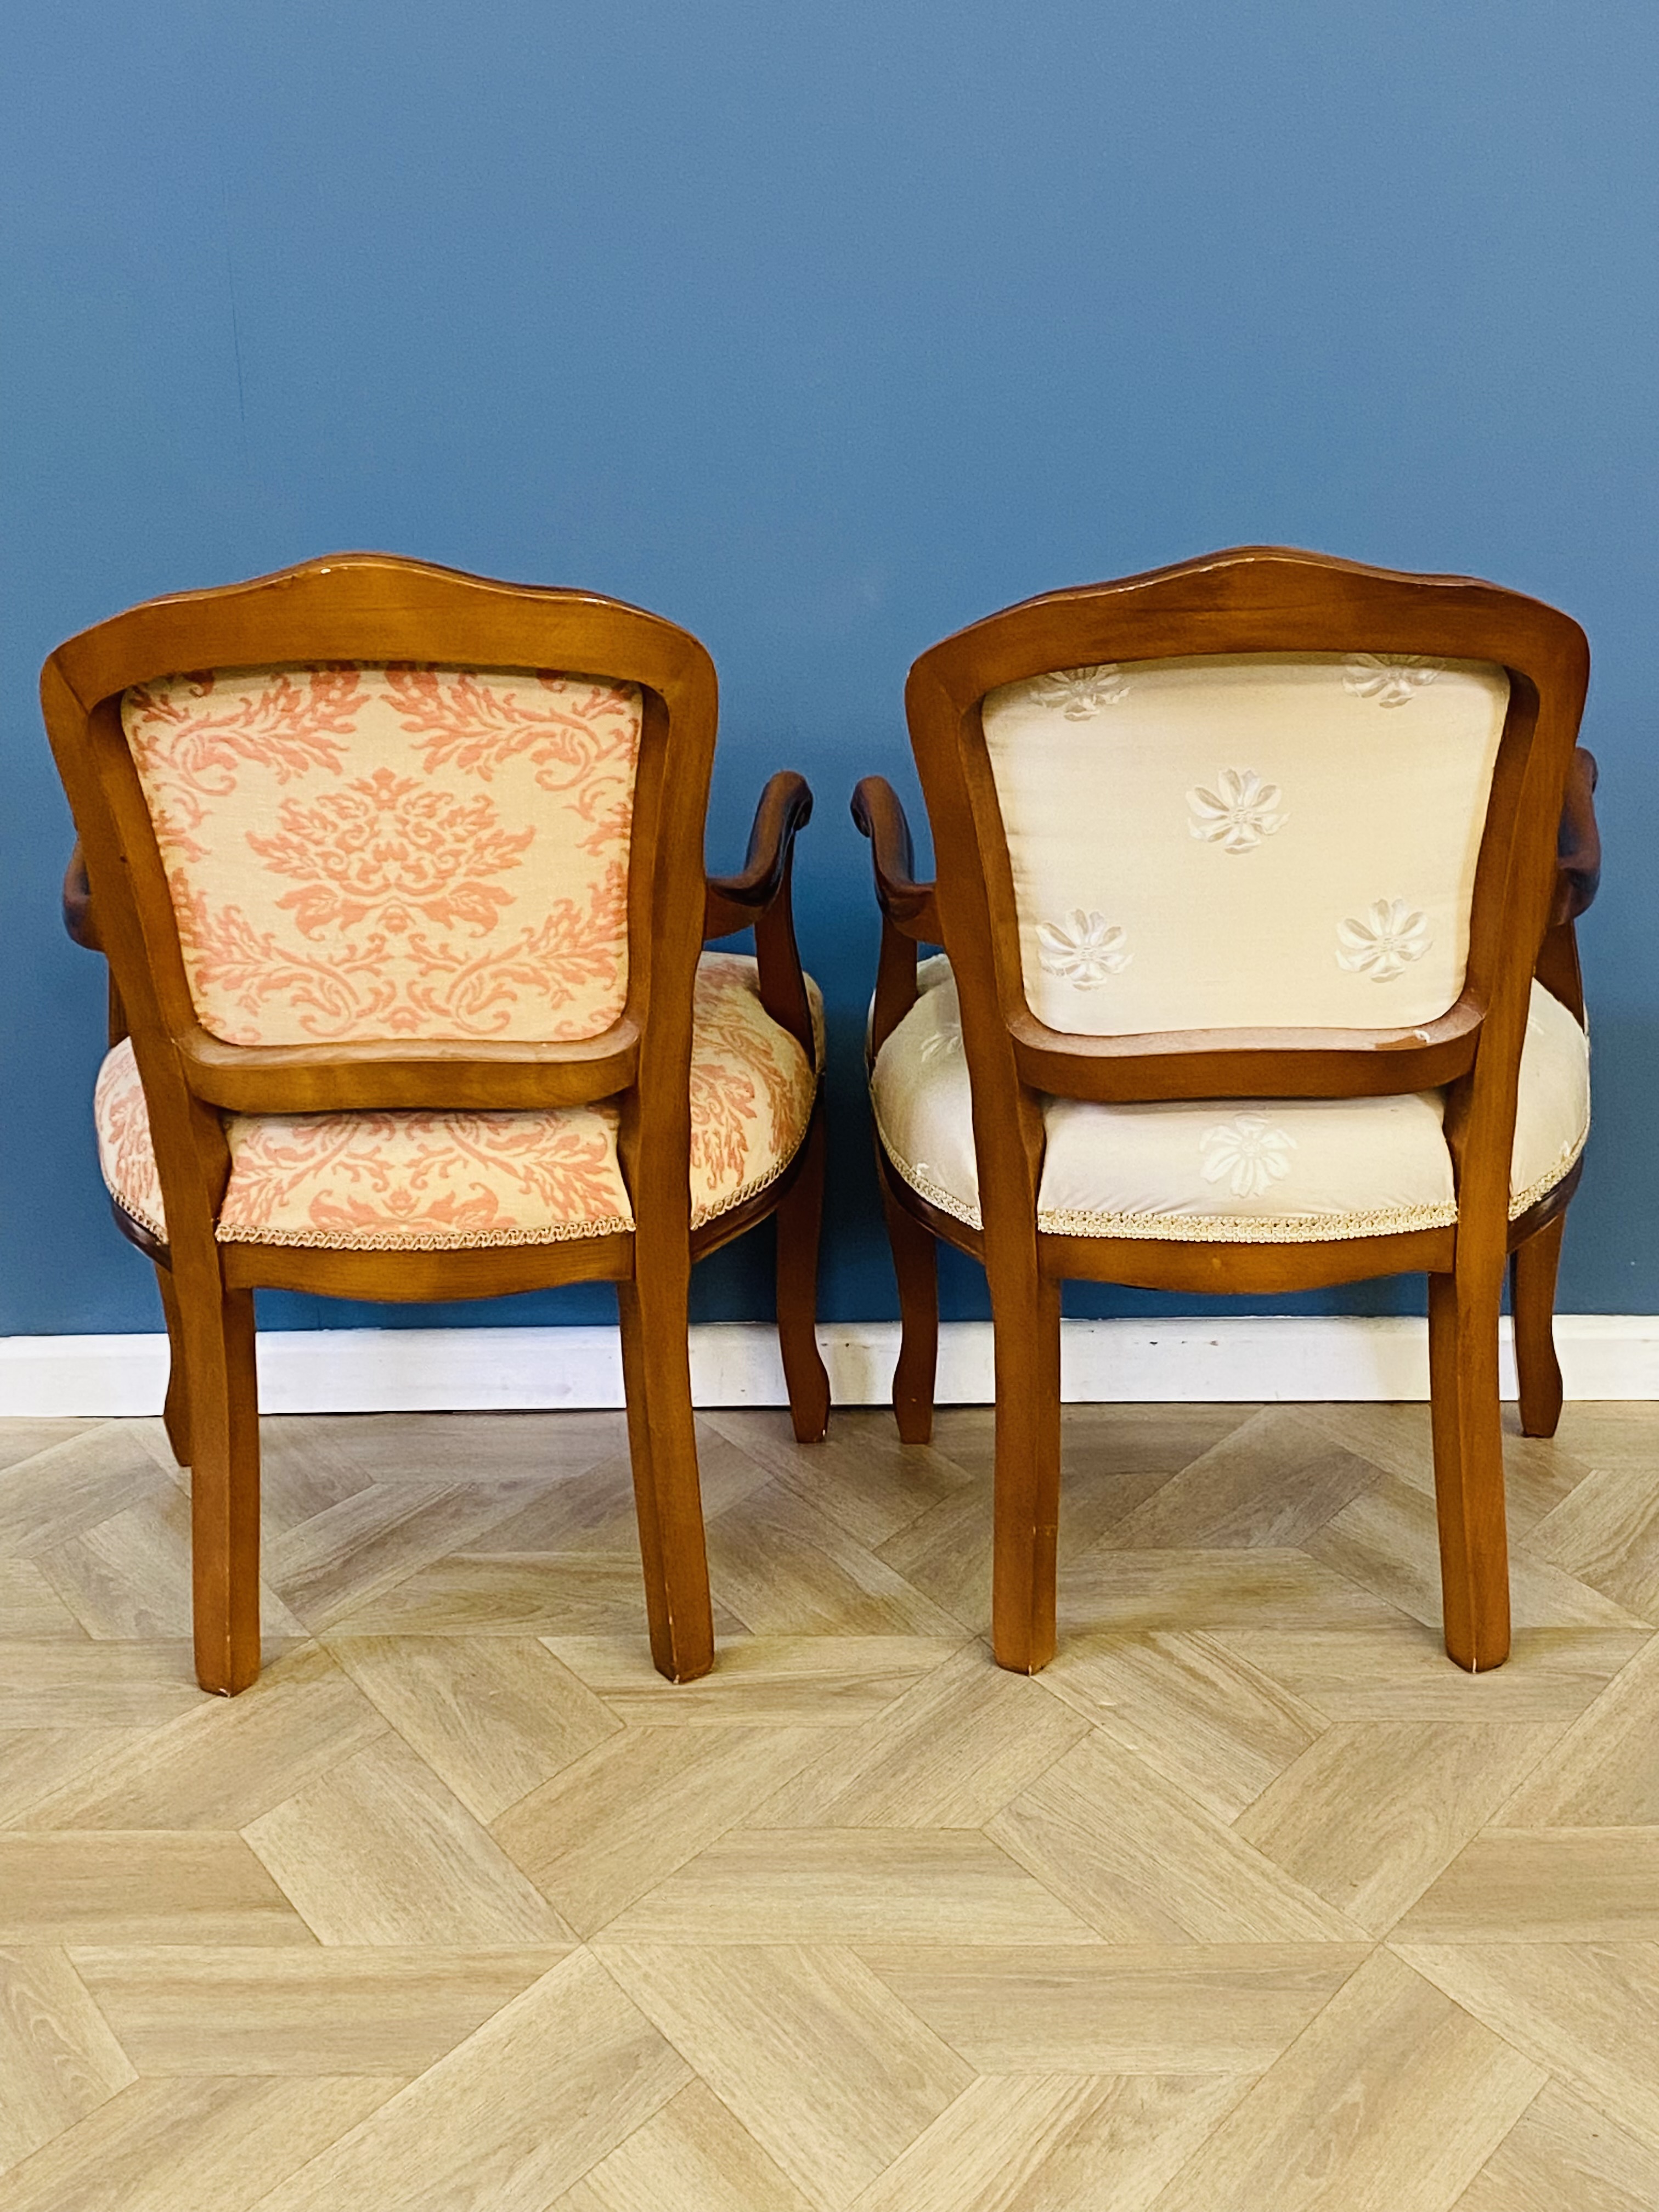 Pair of reproduction French style upholstered elbow chairs - Image 6 of 7